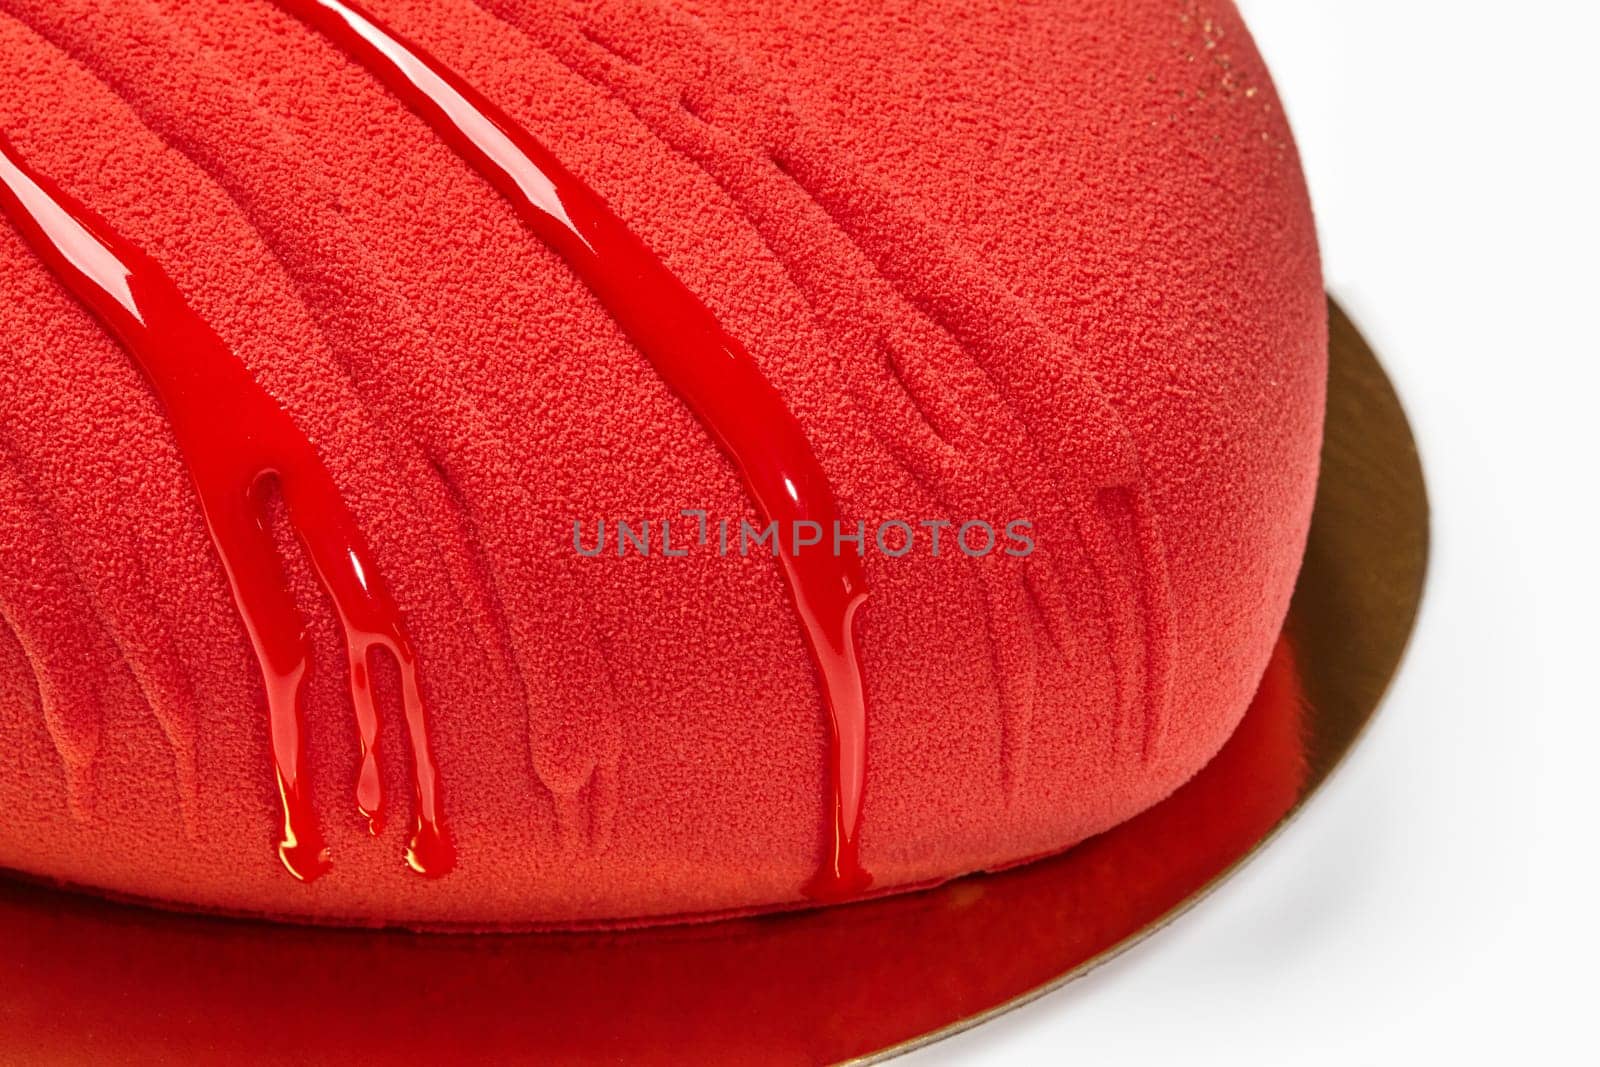 Close-up of heart-shaped red velvet cake drizzled with glossy glaze by nazarovsergey